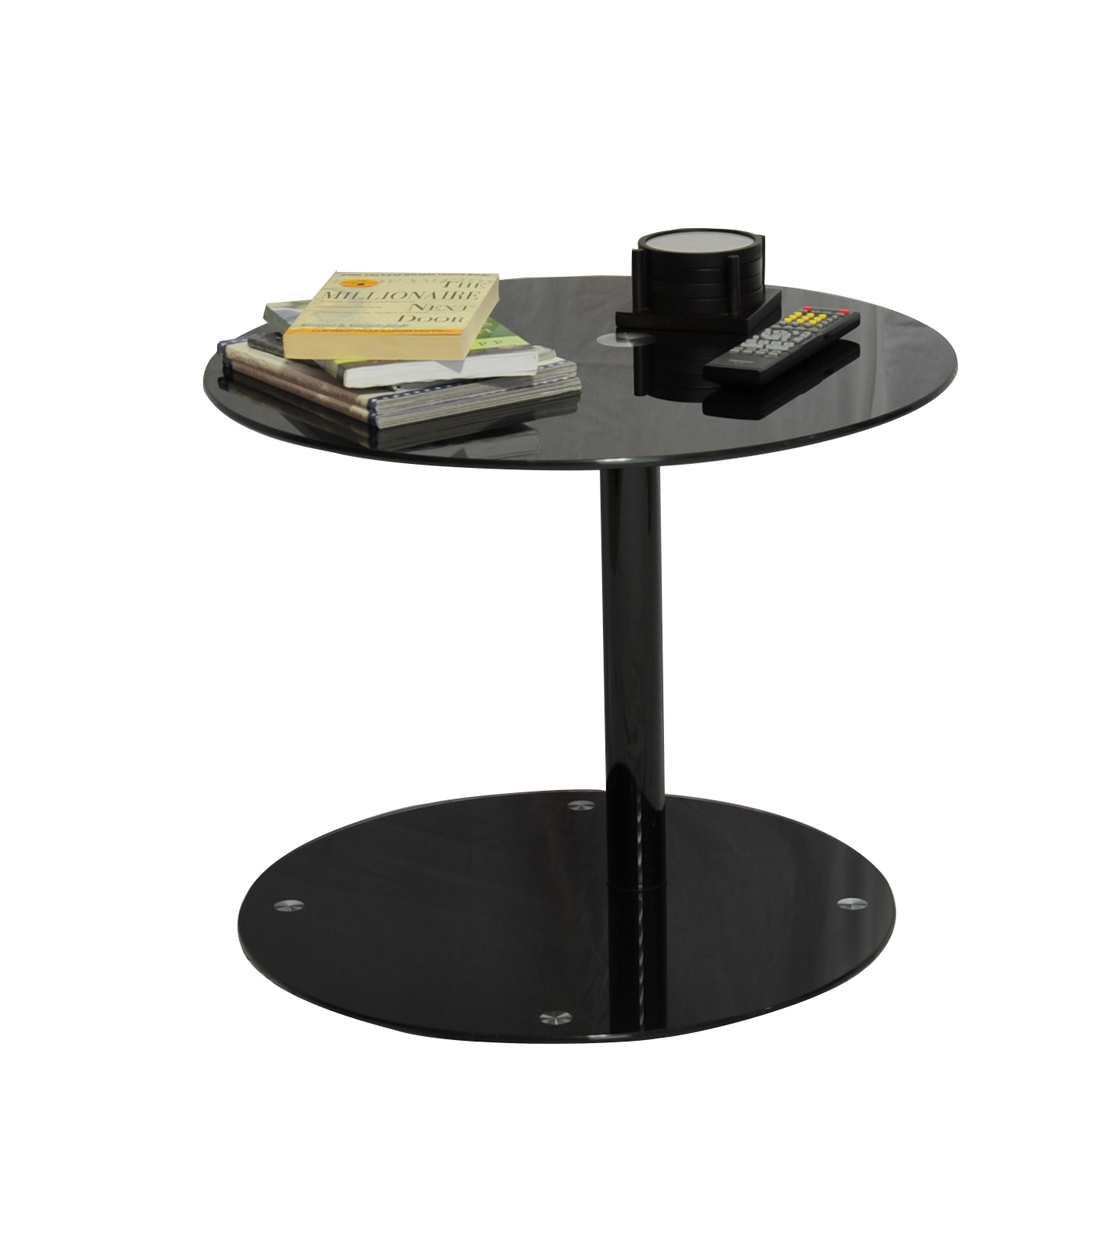 Tier One Designs Coffee Table / End Table - Rta-t1d-200